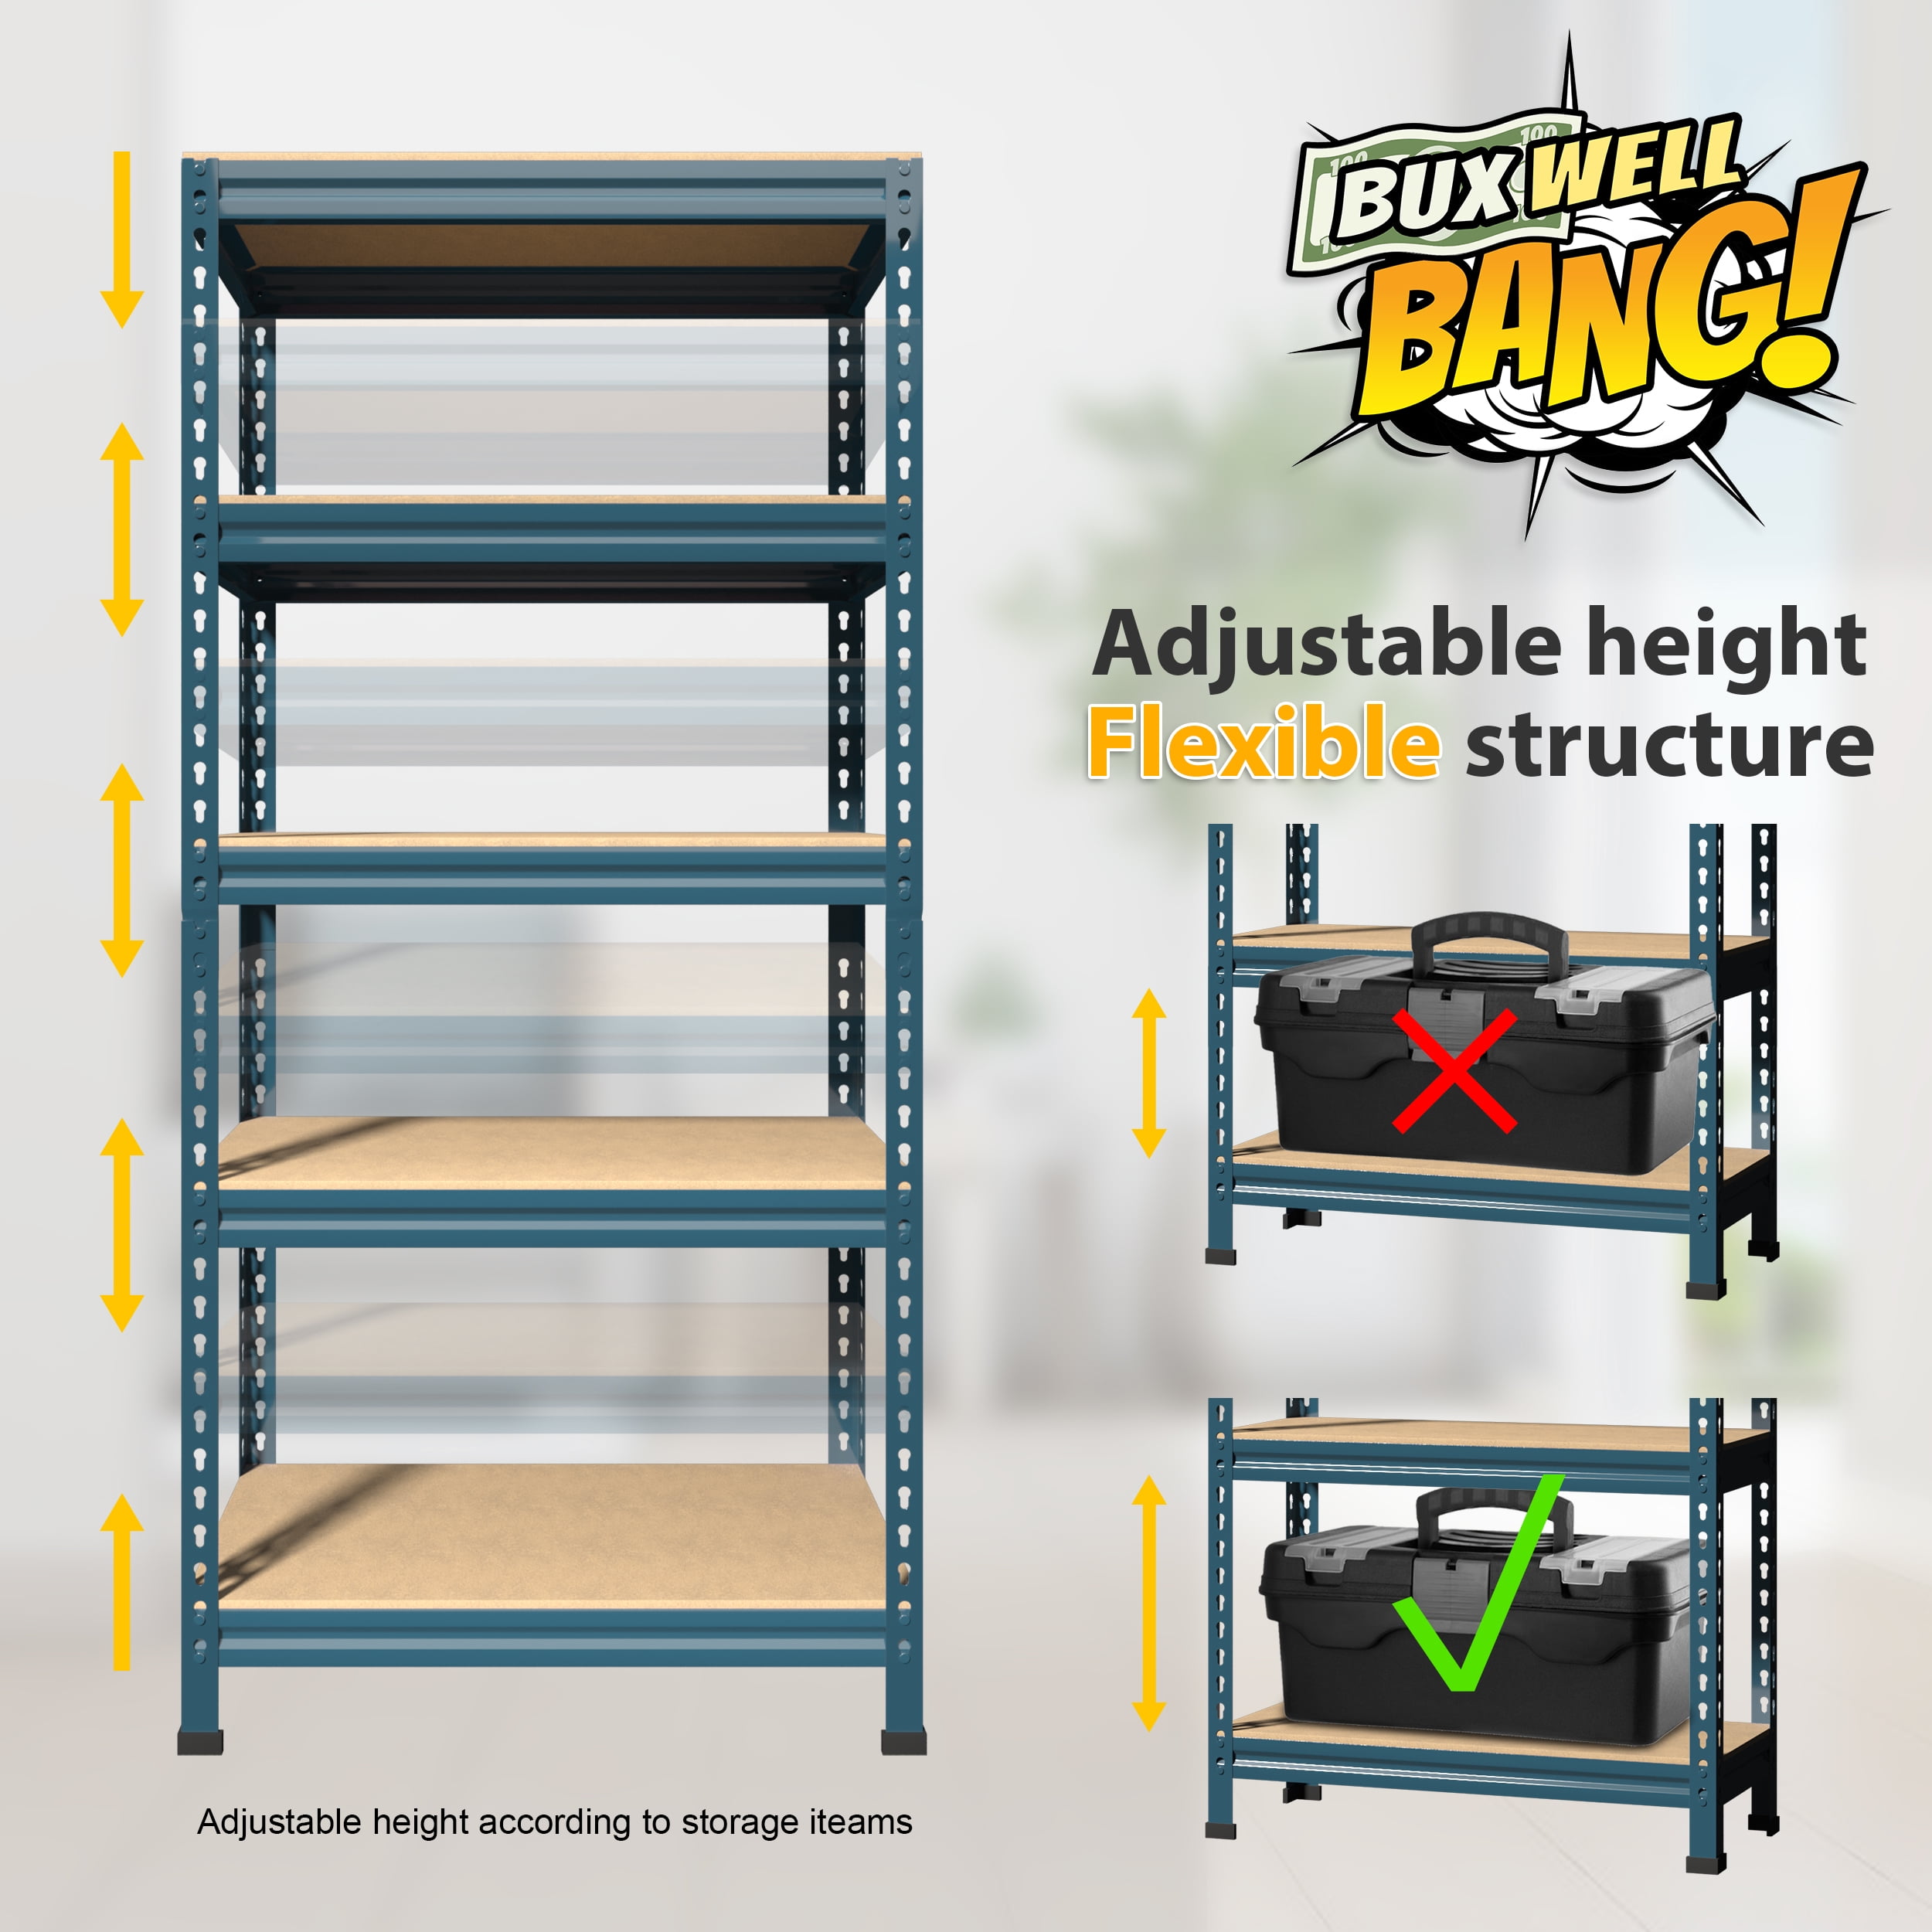 Metal Shelving: Construction, Types, Benefits, and Functions